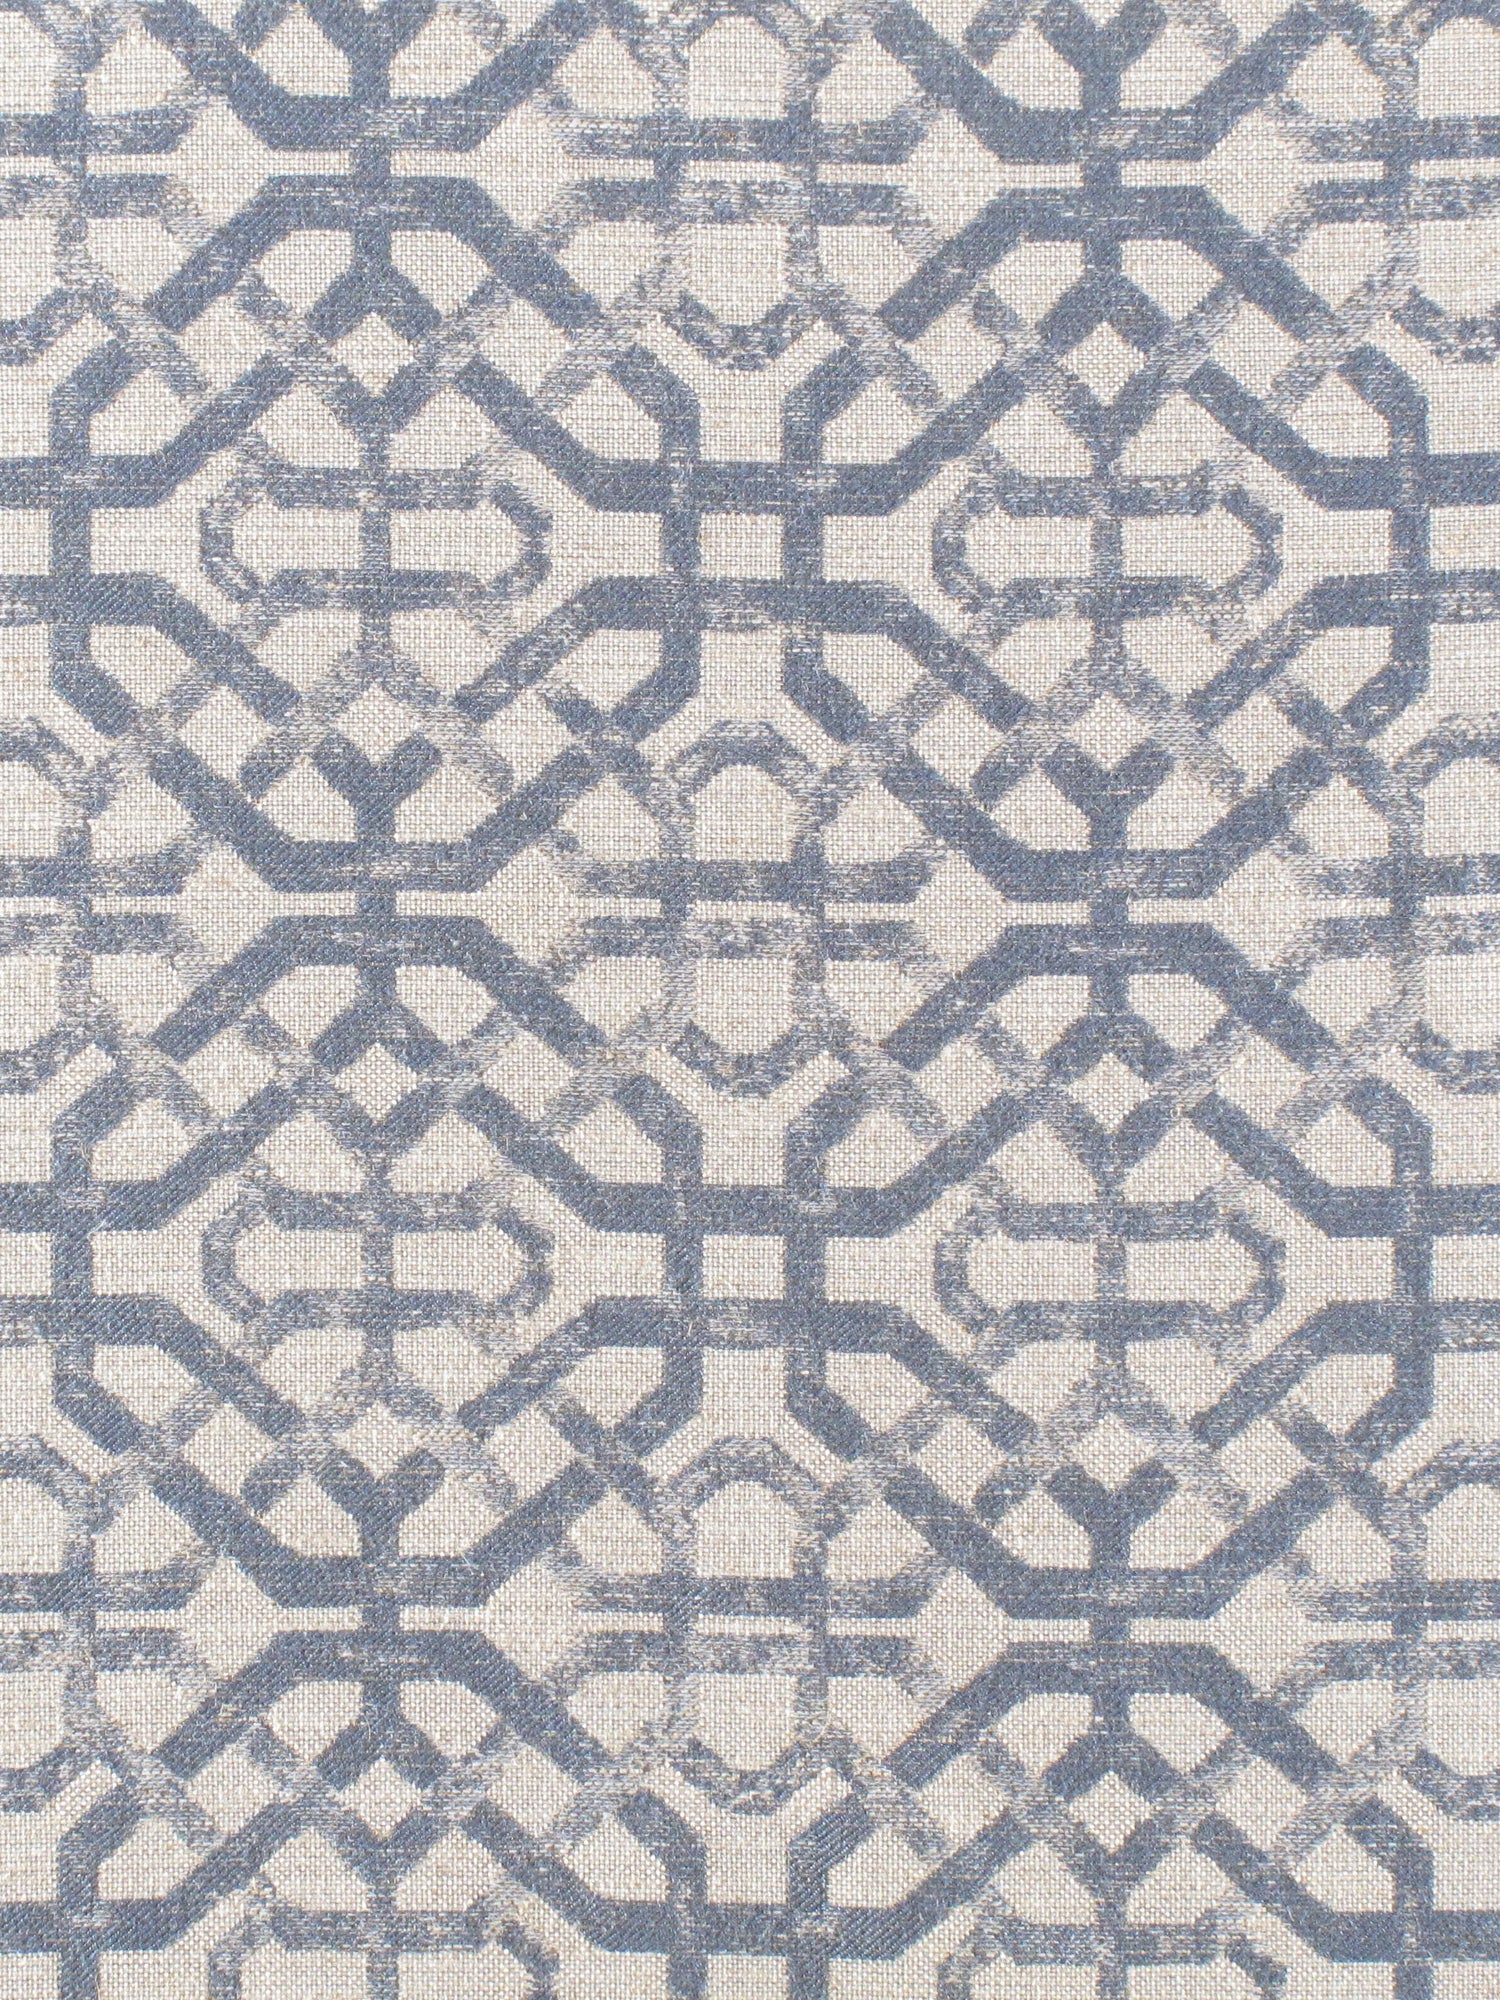 Porta Fregio fabric in ming color - pattern number N3 00023133 - by Scalamandre in the Old World Weavers collection